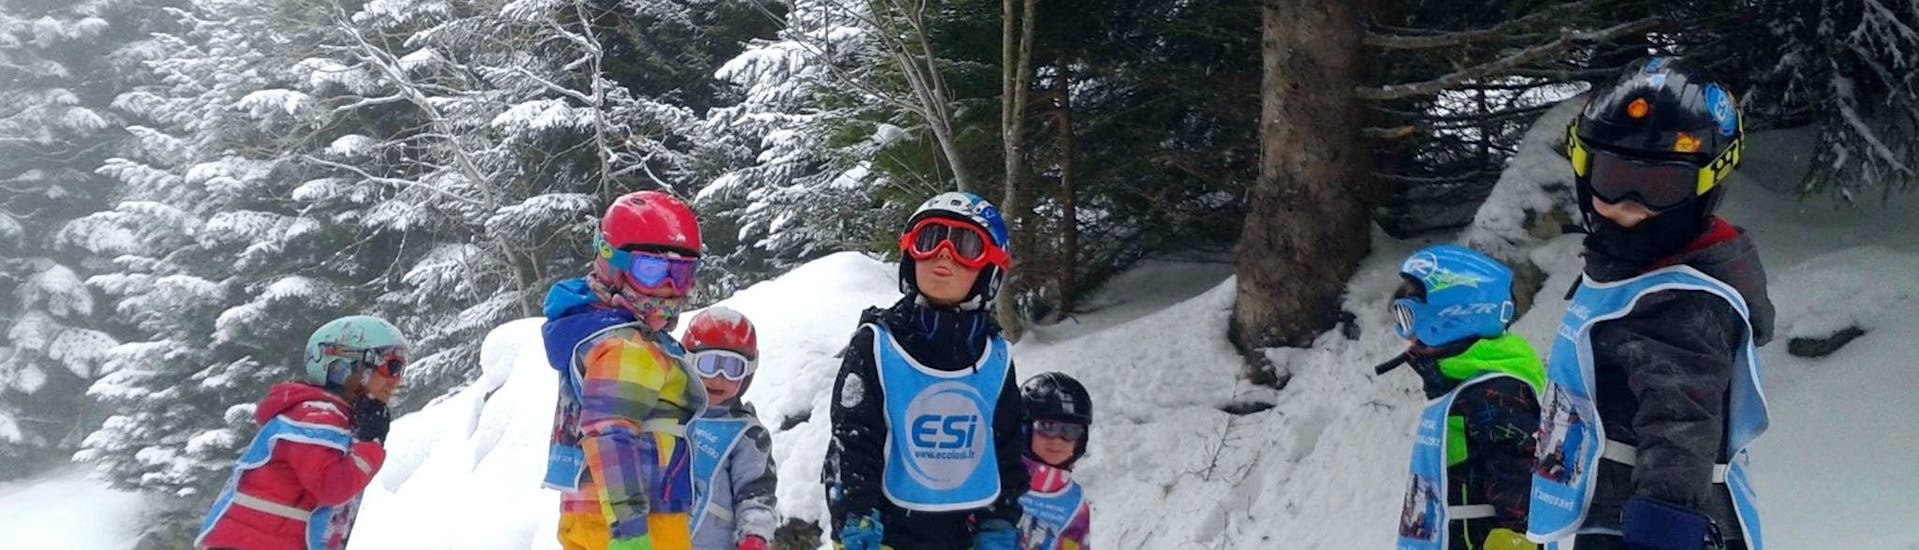 Kids are standing in the middle of the slopes surrounded by trees during their Kids Ski Lessons (3-15 years) - Weekend with the ski school ESI Ecoloski Barèges.